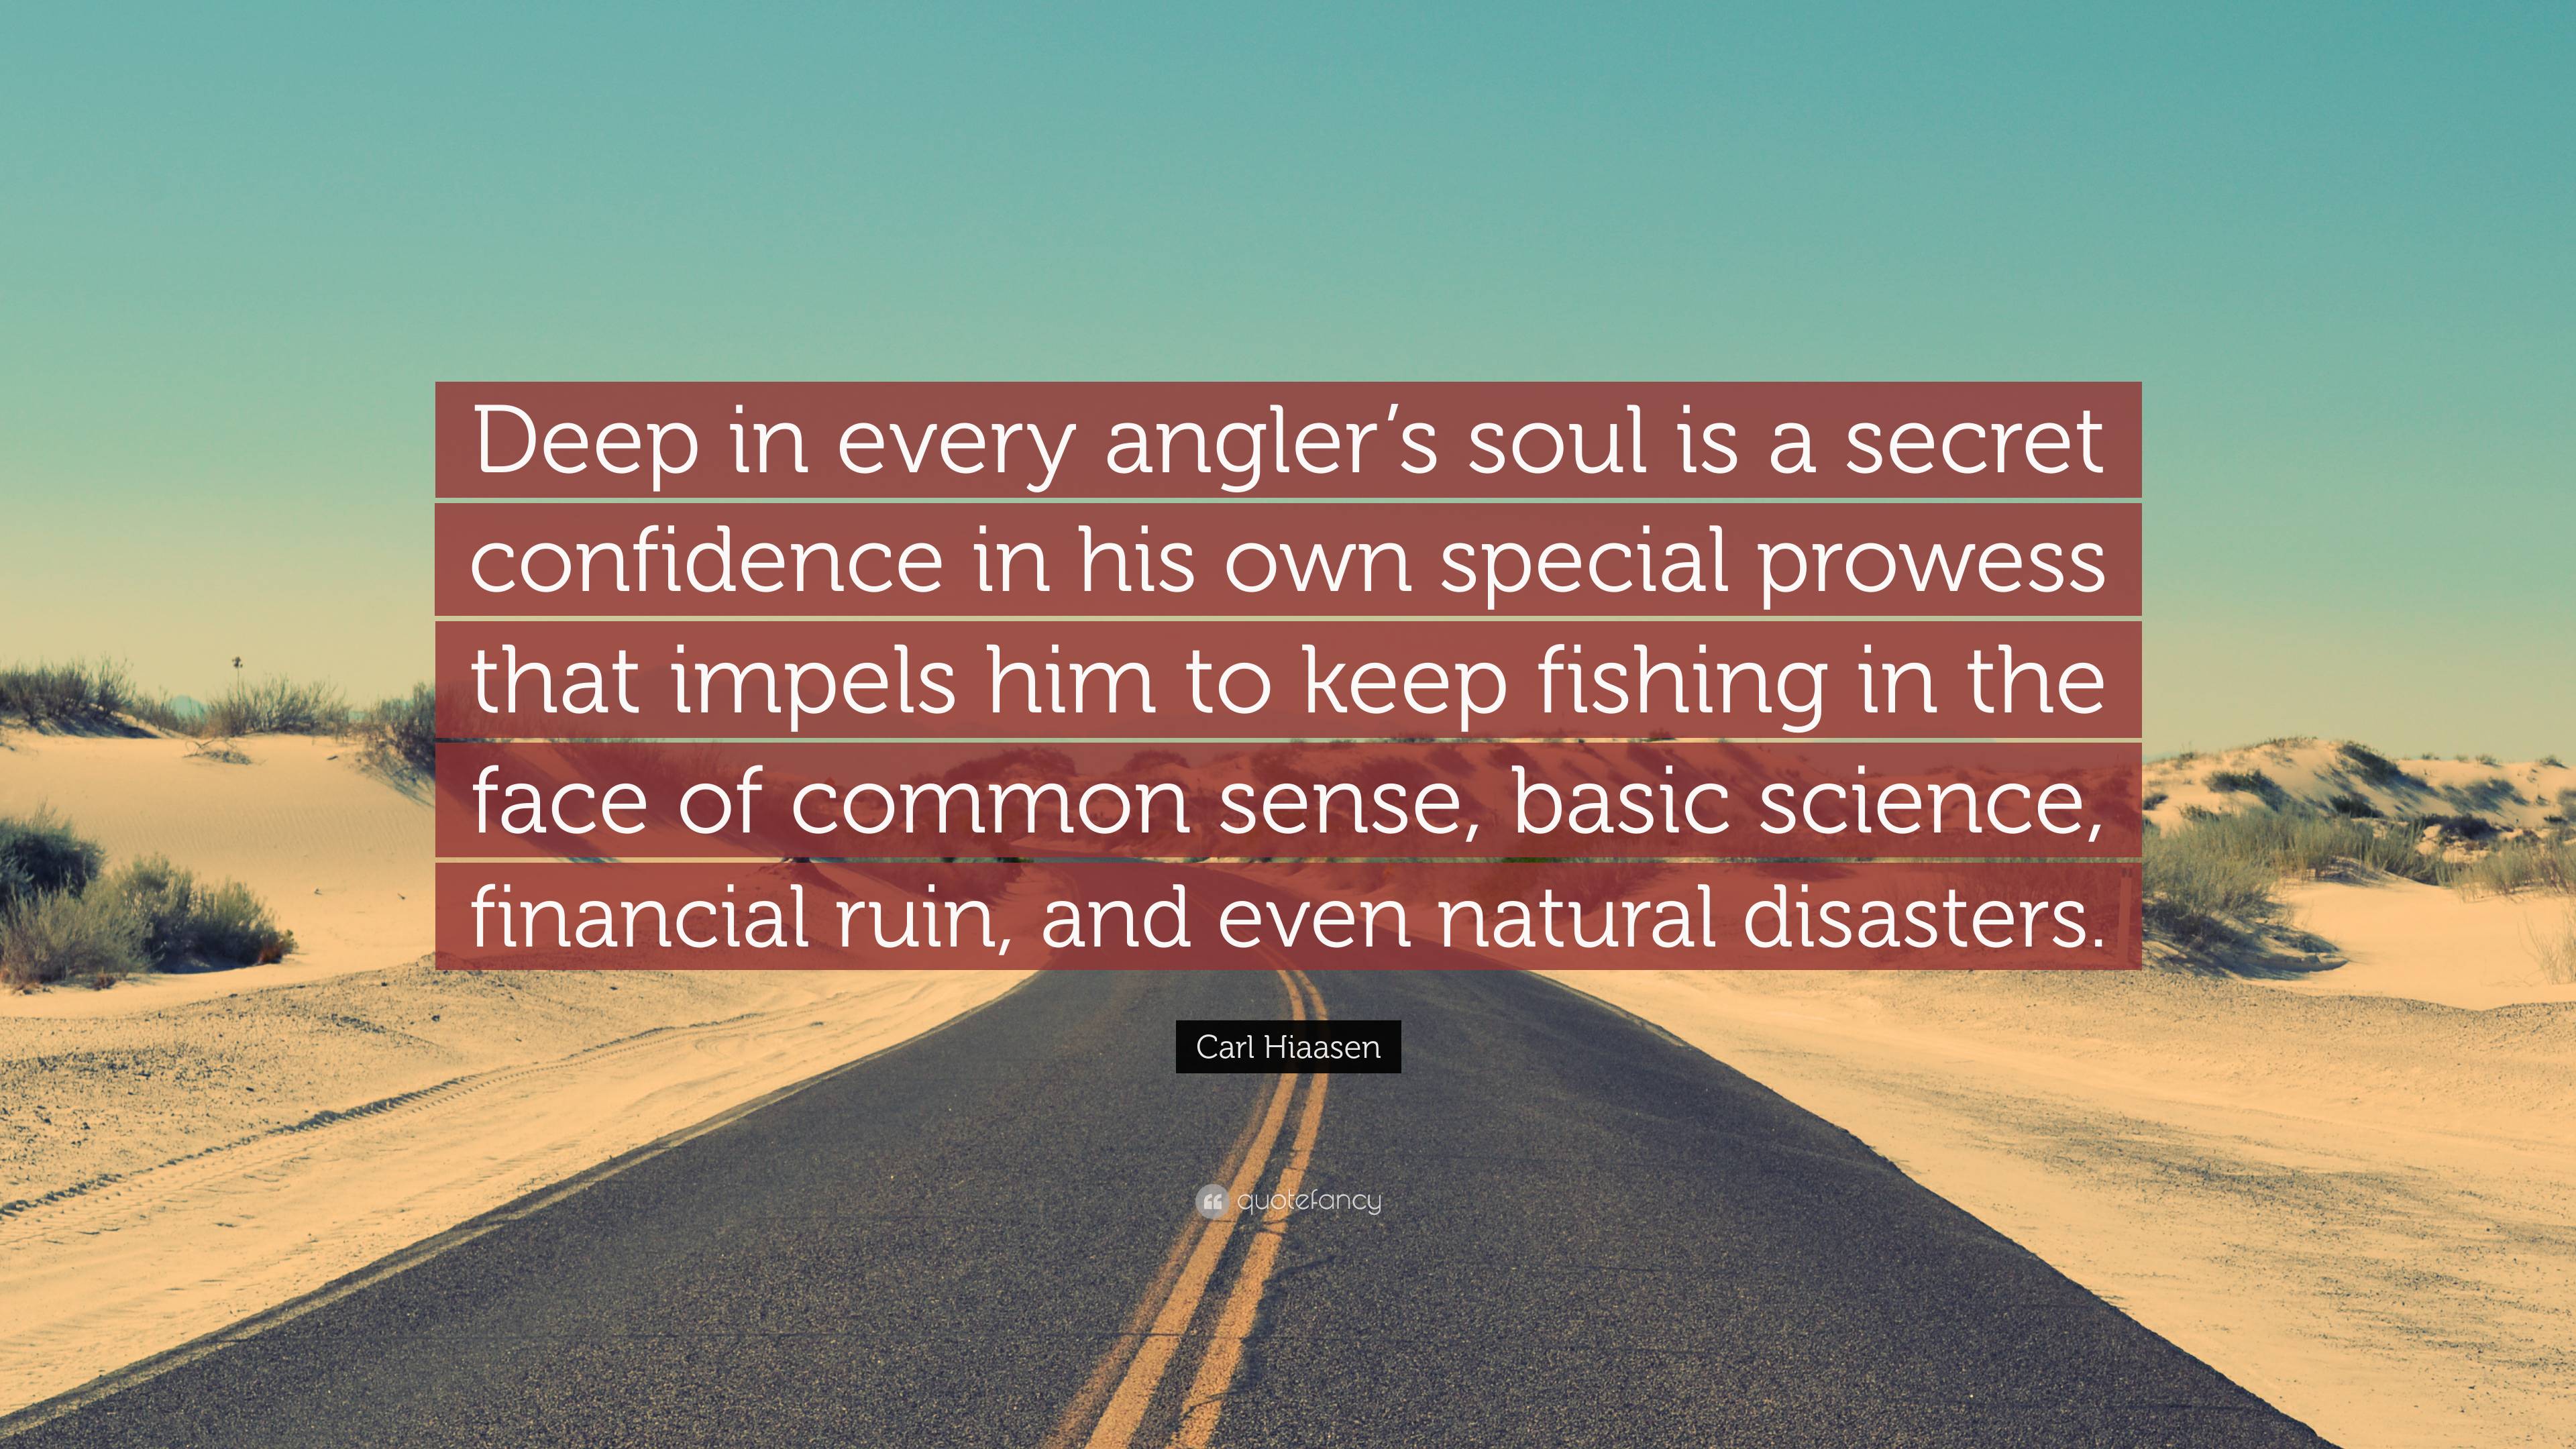 Carl Hiaasen Quote: “Deep in every angler's soul is a secret confidence in  his own special prowess that impels him to keep fishing in the fac”